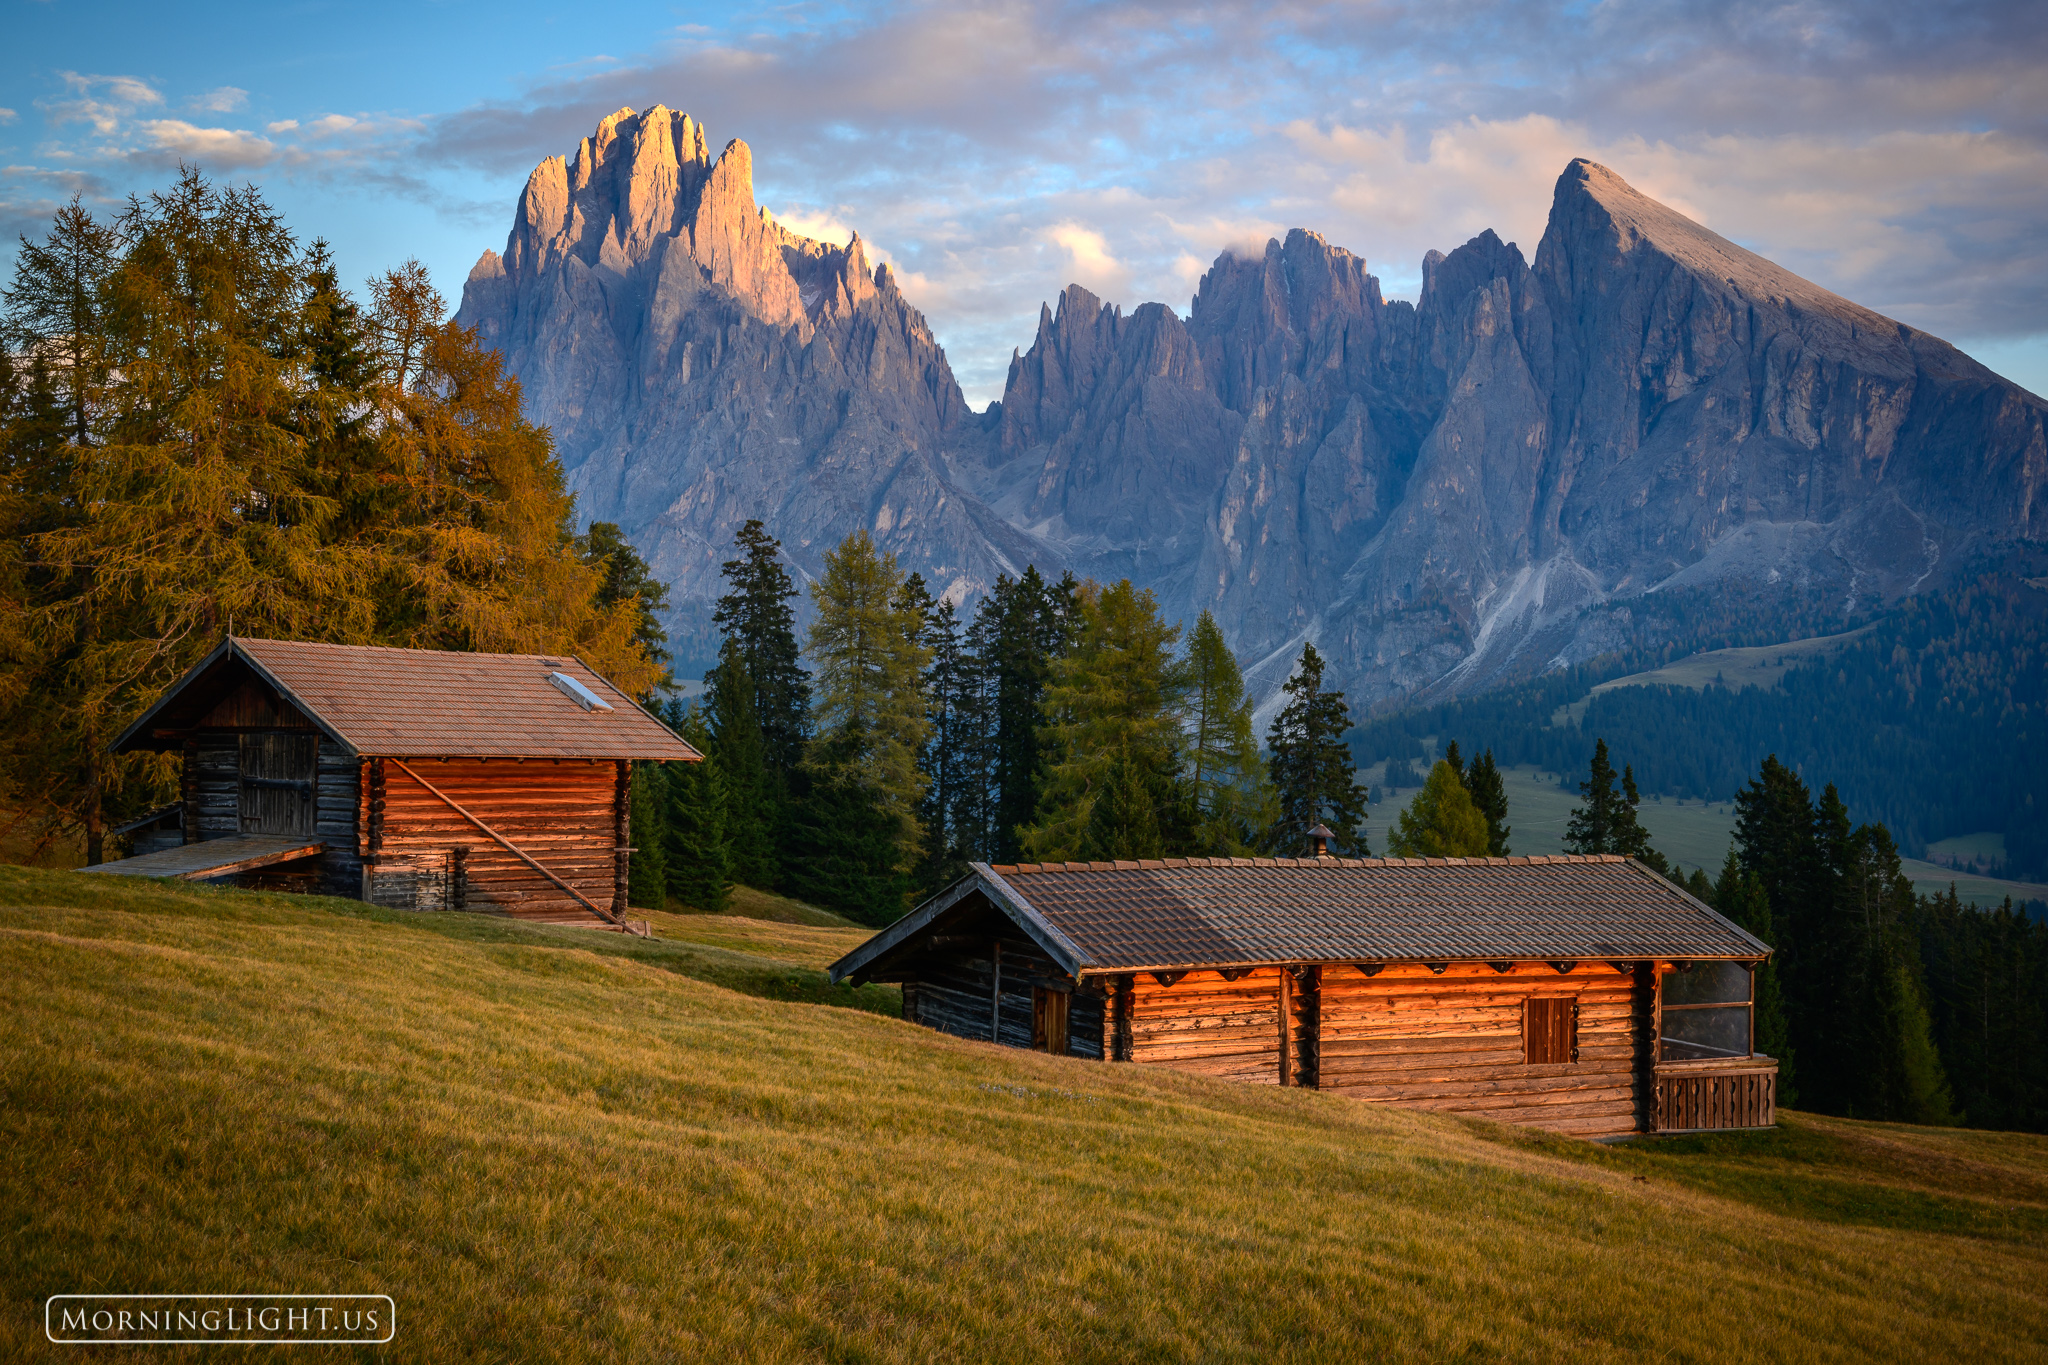 The last rays of the day gently touch this barn and cabin in the dramatic Dolomites in northern Italy.